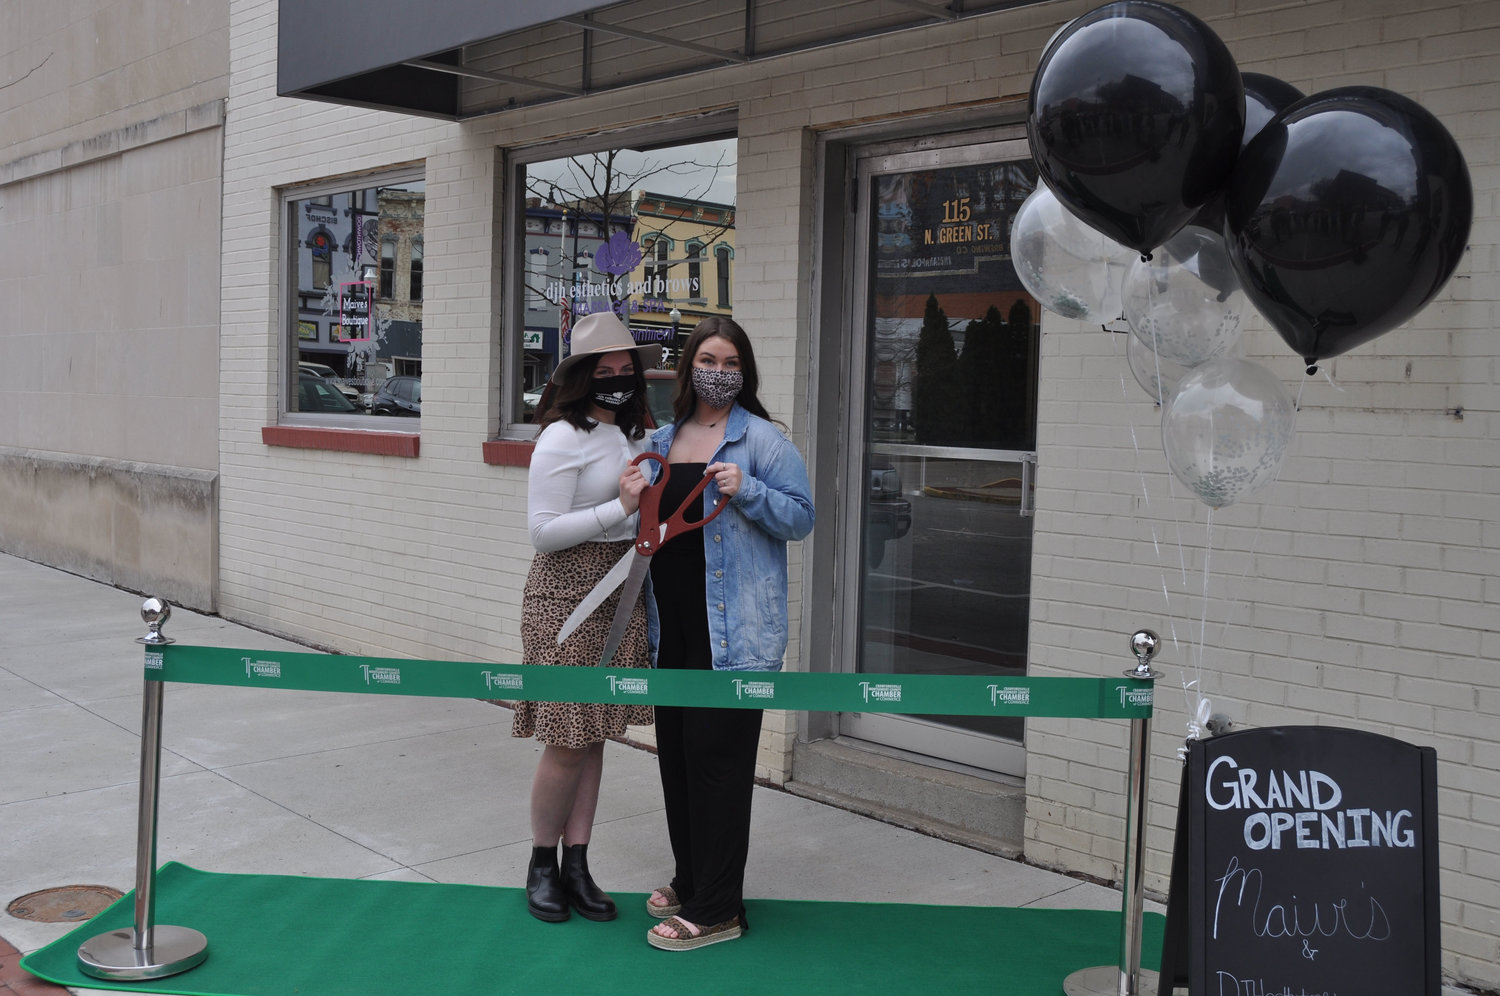 Lilly Wallace, left, and Demi Haas prepare to cut the ribbon of their businesses Maive’s Boutique and djh esthetics and brows at the Weemickle Building in downtown Crawfordsville.